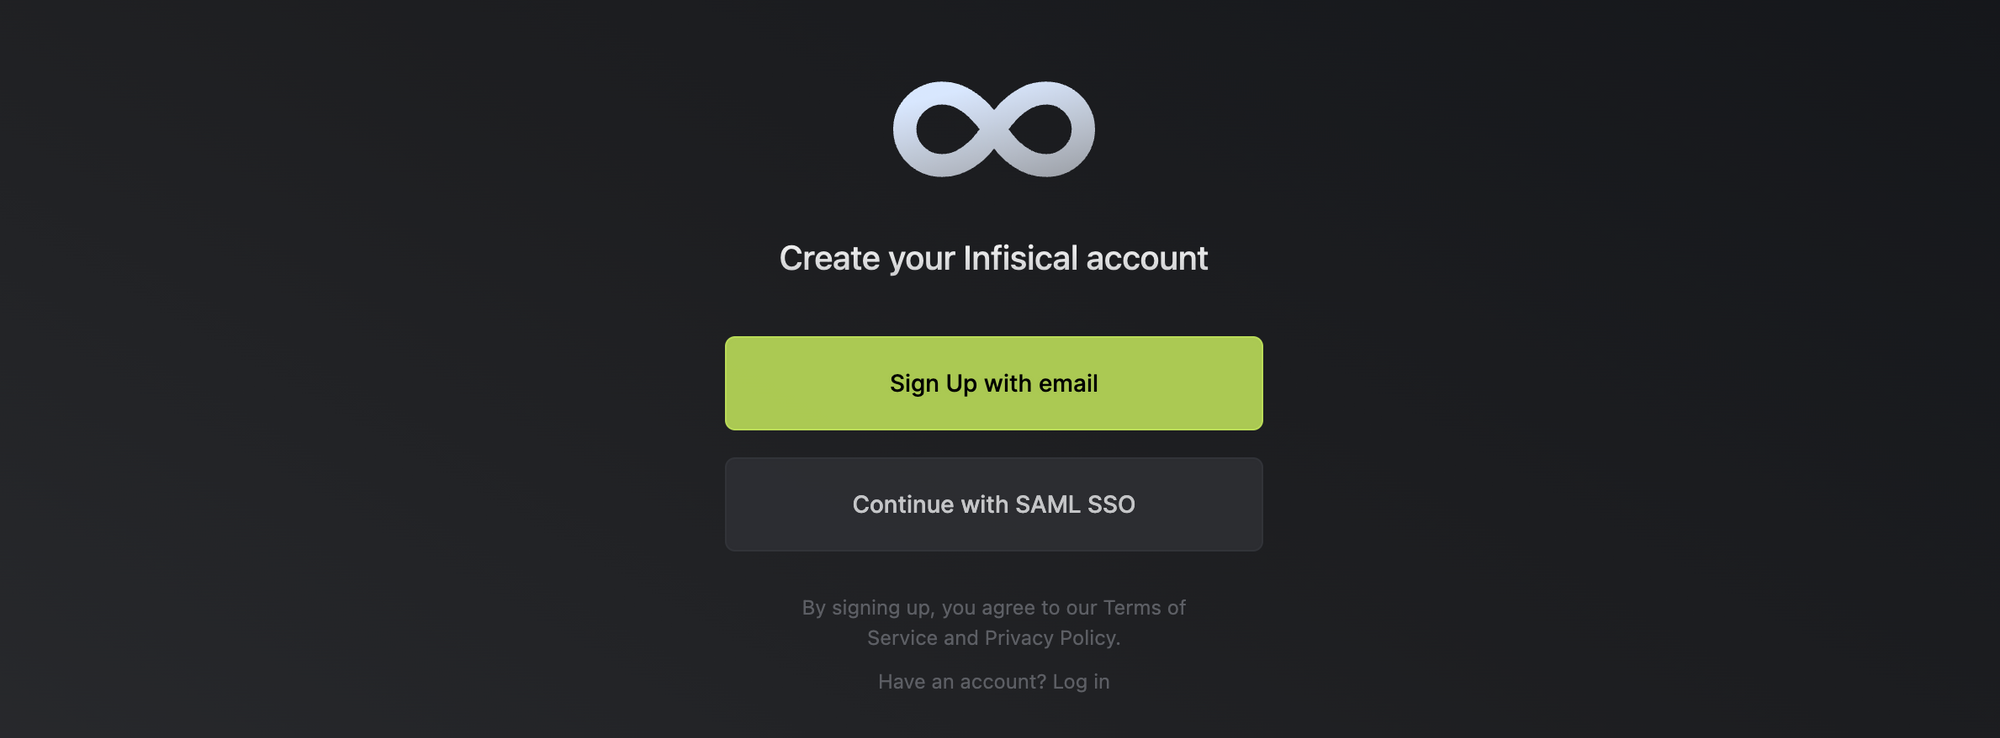 Sign up for a local Infisical account